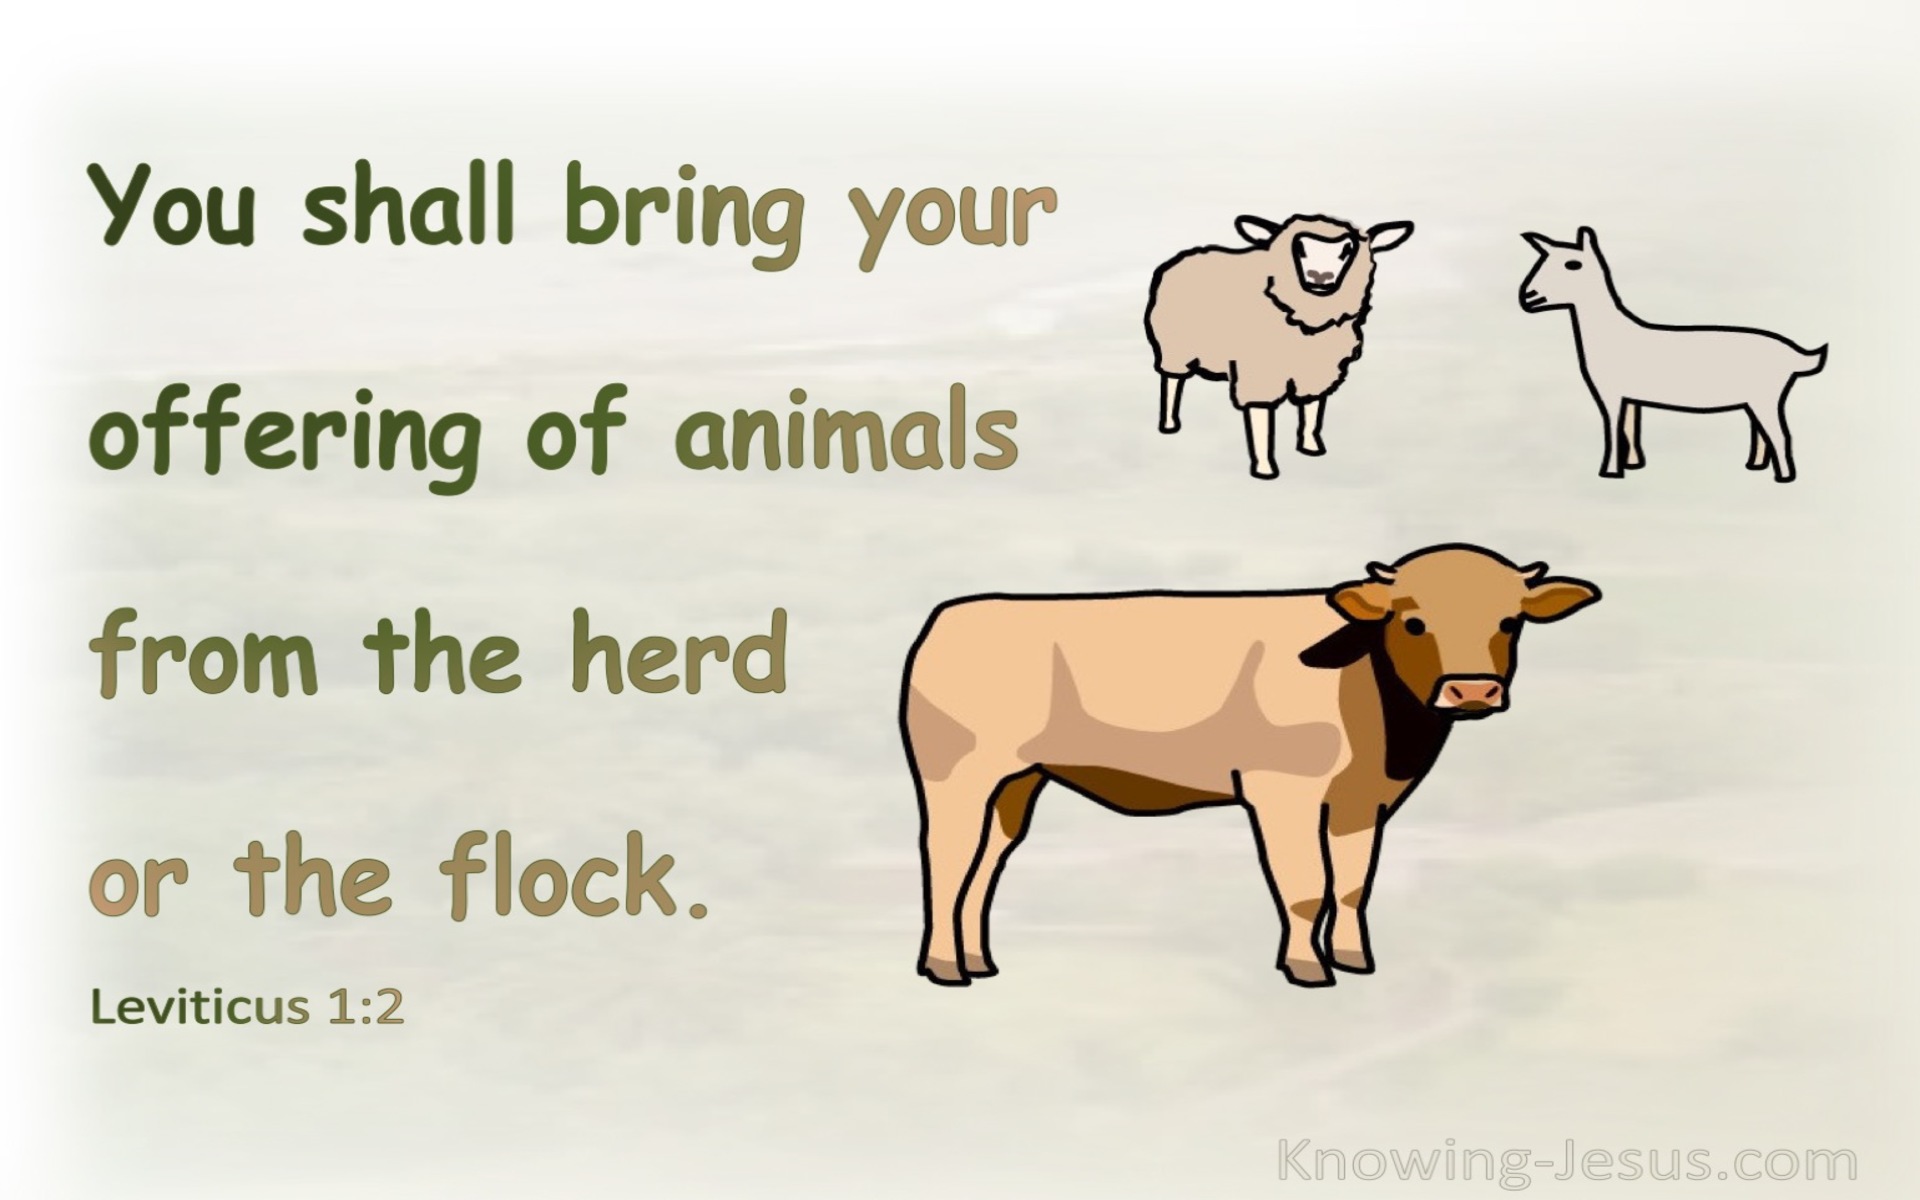 Leviticus 1:2 Bring Your Offering Of Animals From The Herd Or The Flock (green)